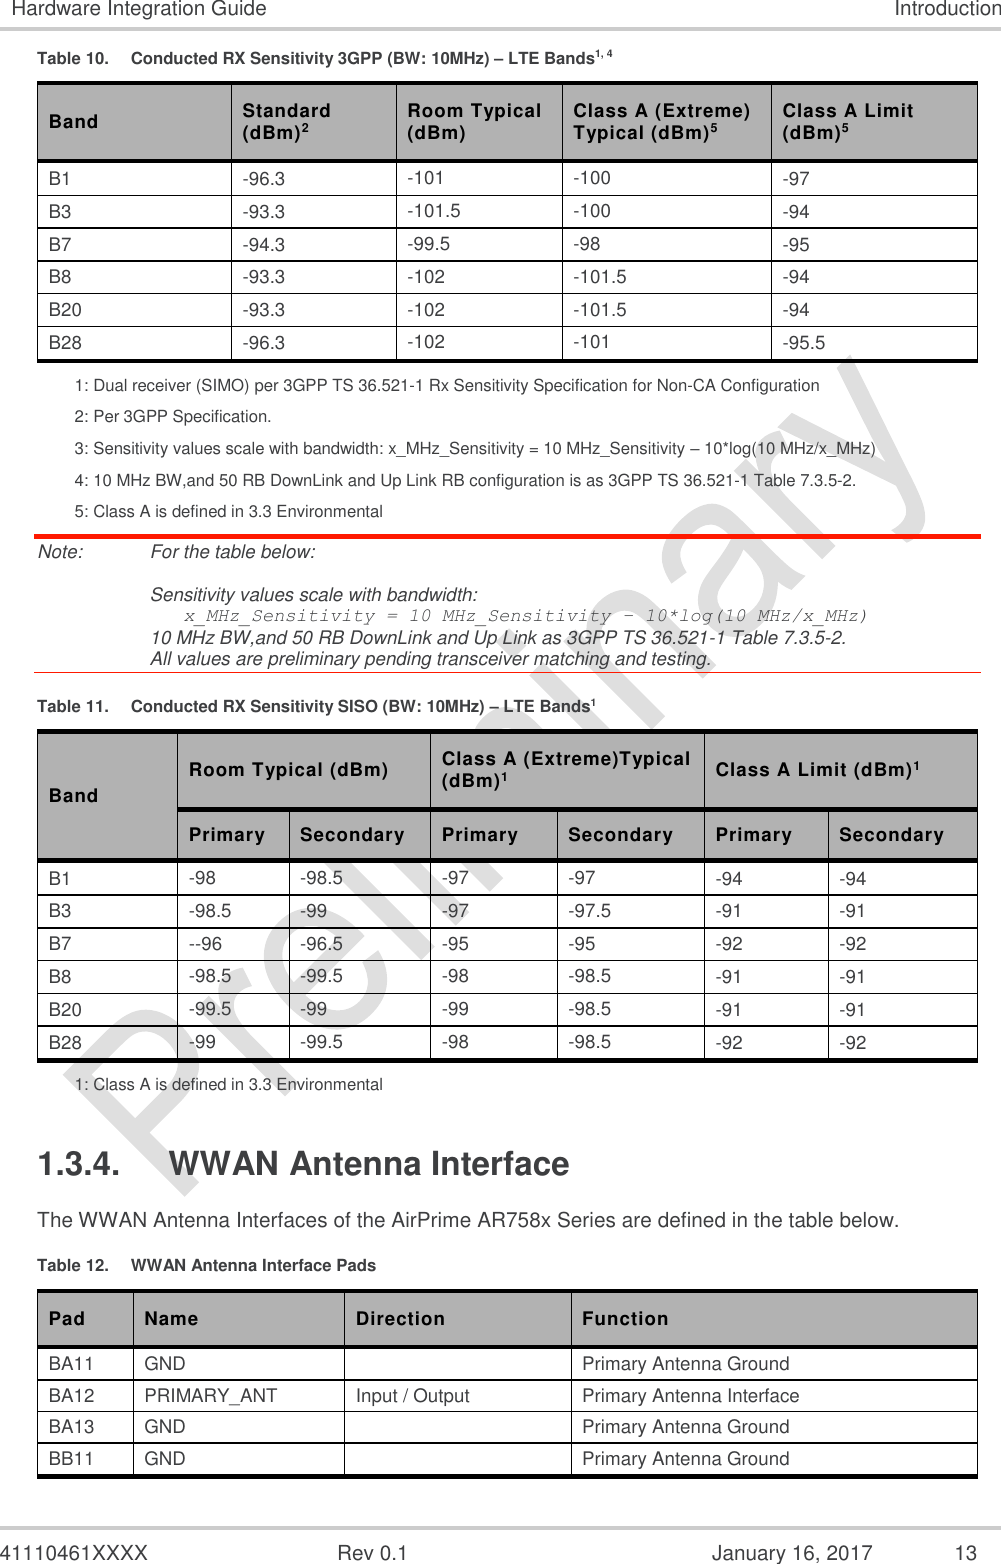  41110461XXXX  Rev 0.1  January 16, 2017  13 Hardware Integration Guide Introduction Table 10.  Conducted RX Sensitivity 3GPP (BW: 10MHz) – LTE Bands1, 4 Band Standard (dBm)2 Room Typical (dBm) Class A (Extreme) Typical (dBm)5 Class A Limit  (dBm)5 B1 -96.3 -101 -100 -97 B3 -93.3 -101.5 -100 -94 B7 -94.3 -99.5 -98 -95 B8 -93.3 -102 -101.5 -94 B20 -93.3 -102 -101.5 -94 B28 -96.3 -102 -101 -95.5 1: Dual receiver (SIMO) per 3GPP TS 36.521-1 Rx Sensitivity Specification for Non-CA Configuration 2: Per 3GPP Specification. 3: Sensitivity values scale with bandwidth: x_MHz_Sensitivity = 10 MHz_Sensitivity – 10*log(10 MHz/x_MHz) 4: 10 MHz BW,and 50 RB DownLink and Up Link RB configuration is as 3GPP TS 36.521-1 Table 7.3.5-2. 5: Class A is defined in 3.3 Environmental Note:   For the table below:  Sensitivity values scale with bandwidth:    x_MHz_Sensitivity = 10 MHz_Sensitivity – 10*log(10 MHz/x_MHz) 10 MHz BW,and 50 RB DownLink and Up Link as 3GPP TS 36.521-1 Table 7.3.5-2. All values are preliminary pending transceiver matching and testing. Table 11.  Conducted RX Sensitivity SISO (BW: 10MHz) – LTE Bands1 Band Room Typical (dBm) Class A (Extreme)Typical (dBm)1 Class A Limit (dBm)1 Primary Secondary Primary Secondary Primary Secondary B1 -98 -98.5 -97 -97 -94 -94 B3 -98.5 -99 -97 -97.5 -91 -91 B7 --96 -96.5 -95 -95 -92 -92 B8 -98.5 -99.5 -98 -98.5 -91 -91 B20 -99.5 -99 -99 -98.5 -91 -91 B28 -99 -99.5 -98 -98.5 -92 -92 1: Class A is defined in 3.3 Environmental 1.3.4.  WWAN Antenna Interface The WWAN Antenna Interfaces of the AirPrime AR758x Series are defined in the table below. Table 12.  WWAN Antenna Interface Pads Pad Name Direction Function BA11 GND   Primary Antenna Ground BA12 PRIMARY_ANT Input / Output Primary Antenna Interface BA13 GND   Primary Antenna Ground BB11 GND   Primary Antenna Ground 